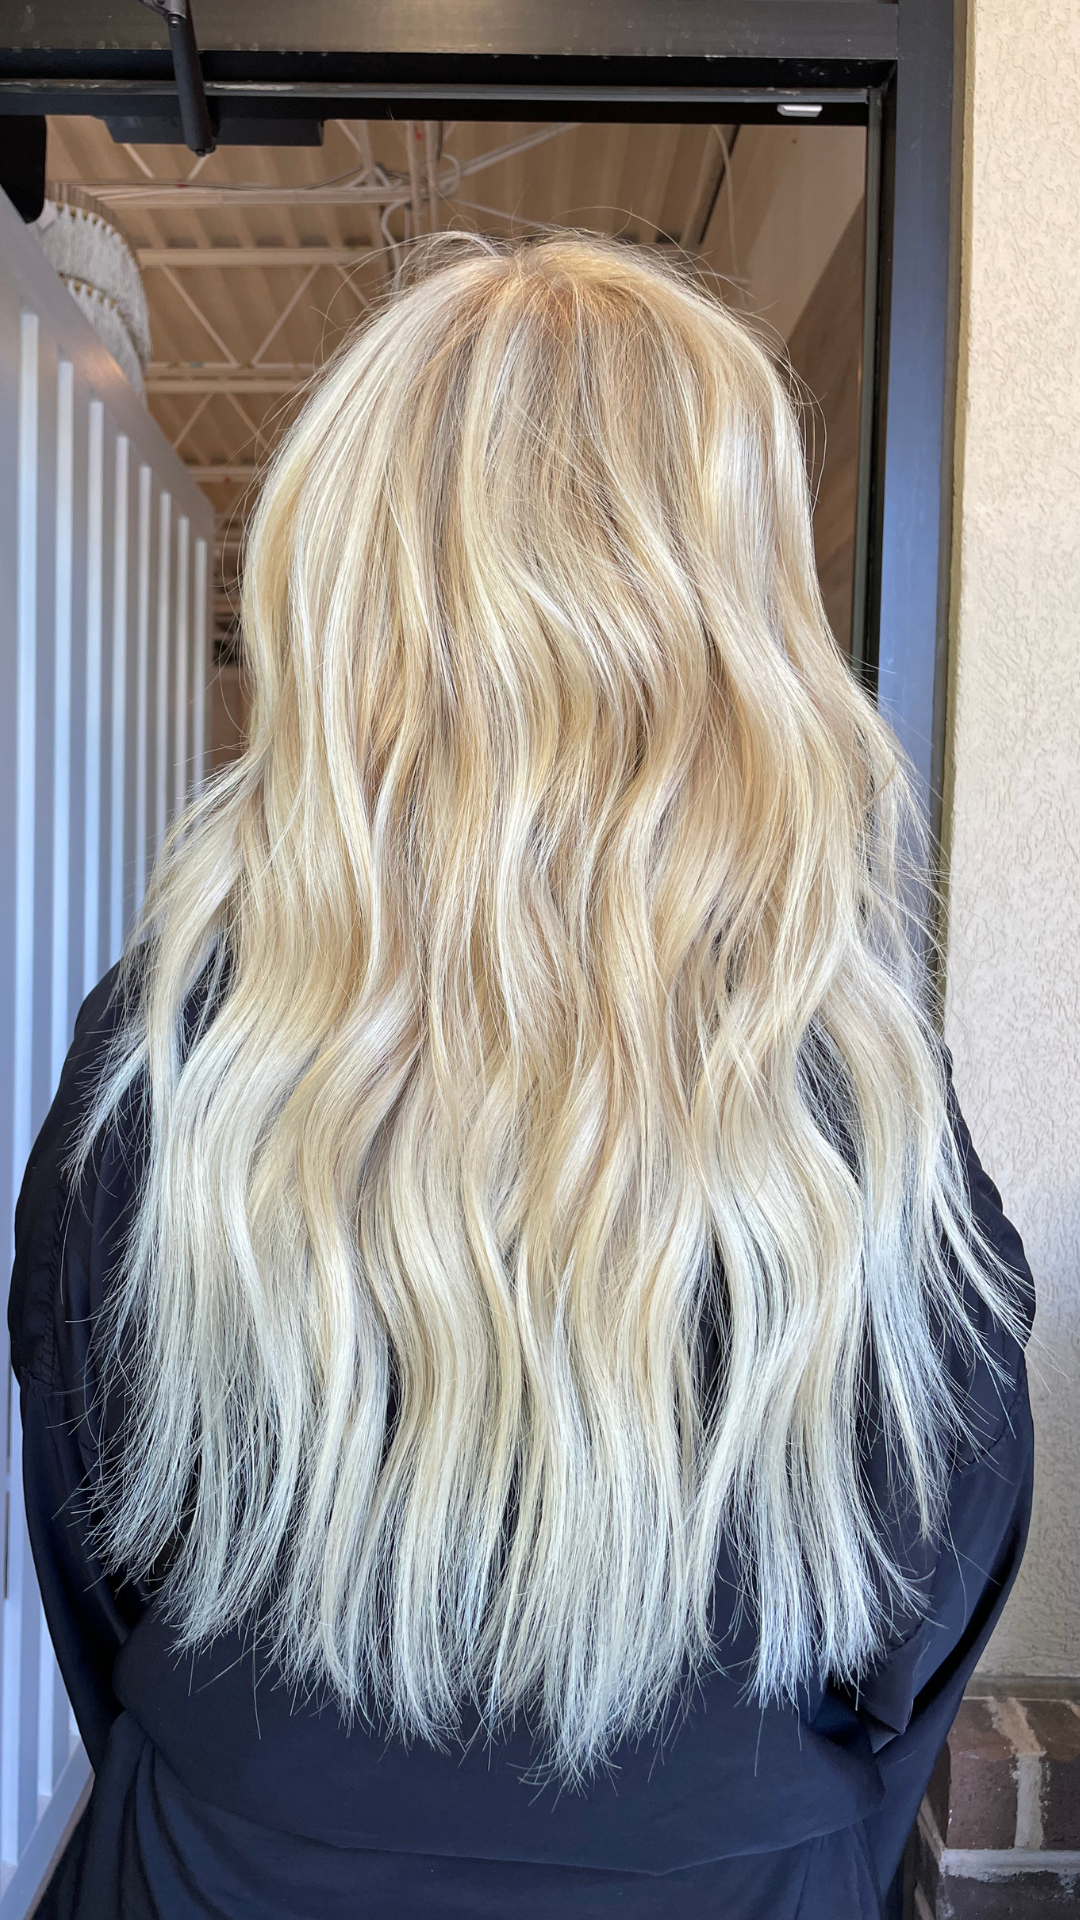 Hair Extensions and Custom Color